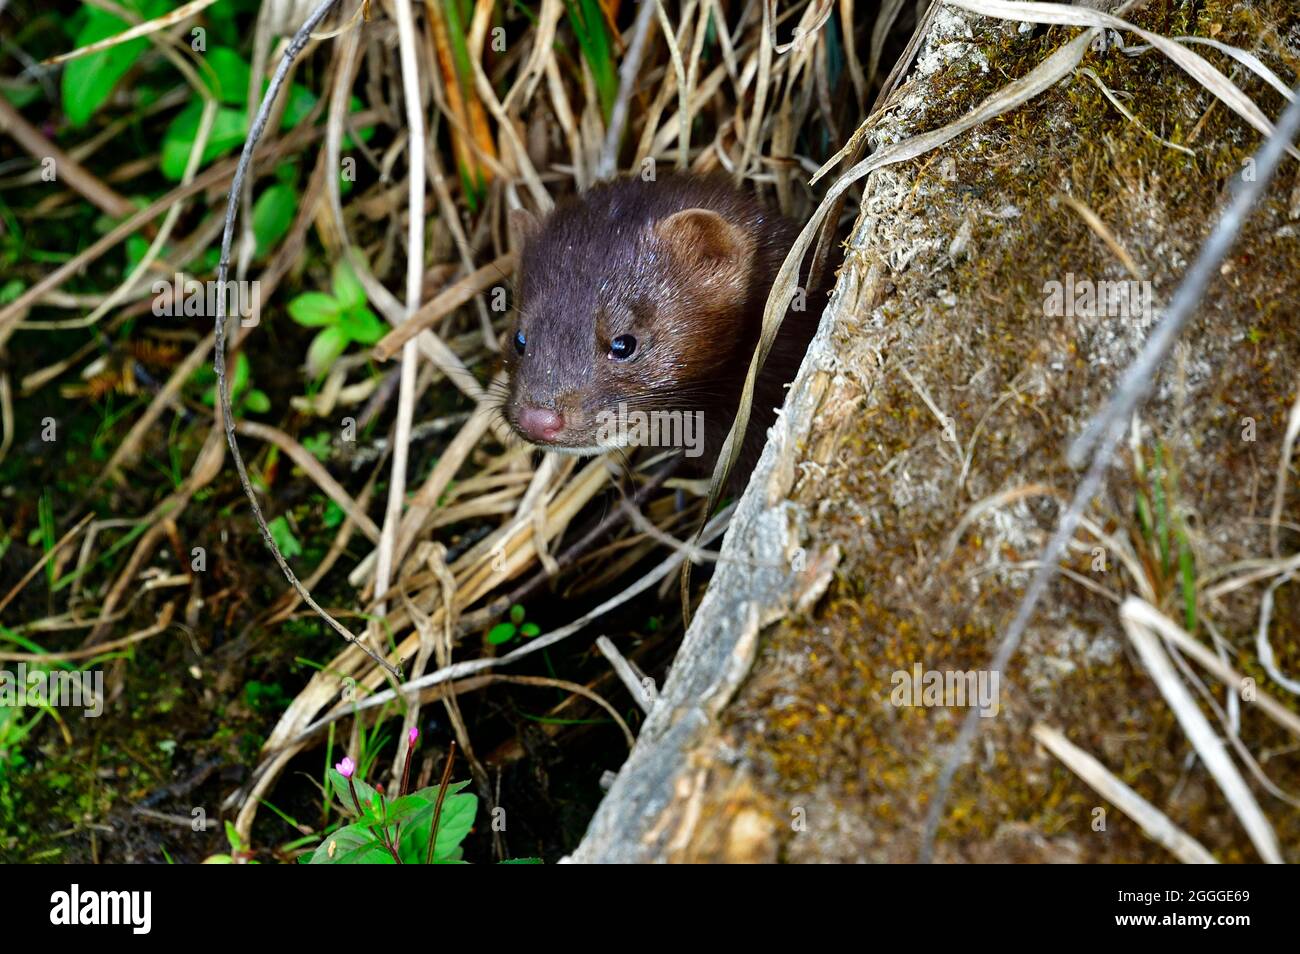 A wild mink 'Mustela vison', peeking out from under a log in rural Alberta Canada Stock Photo